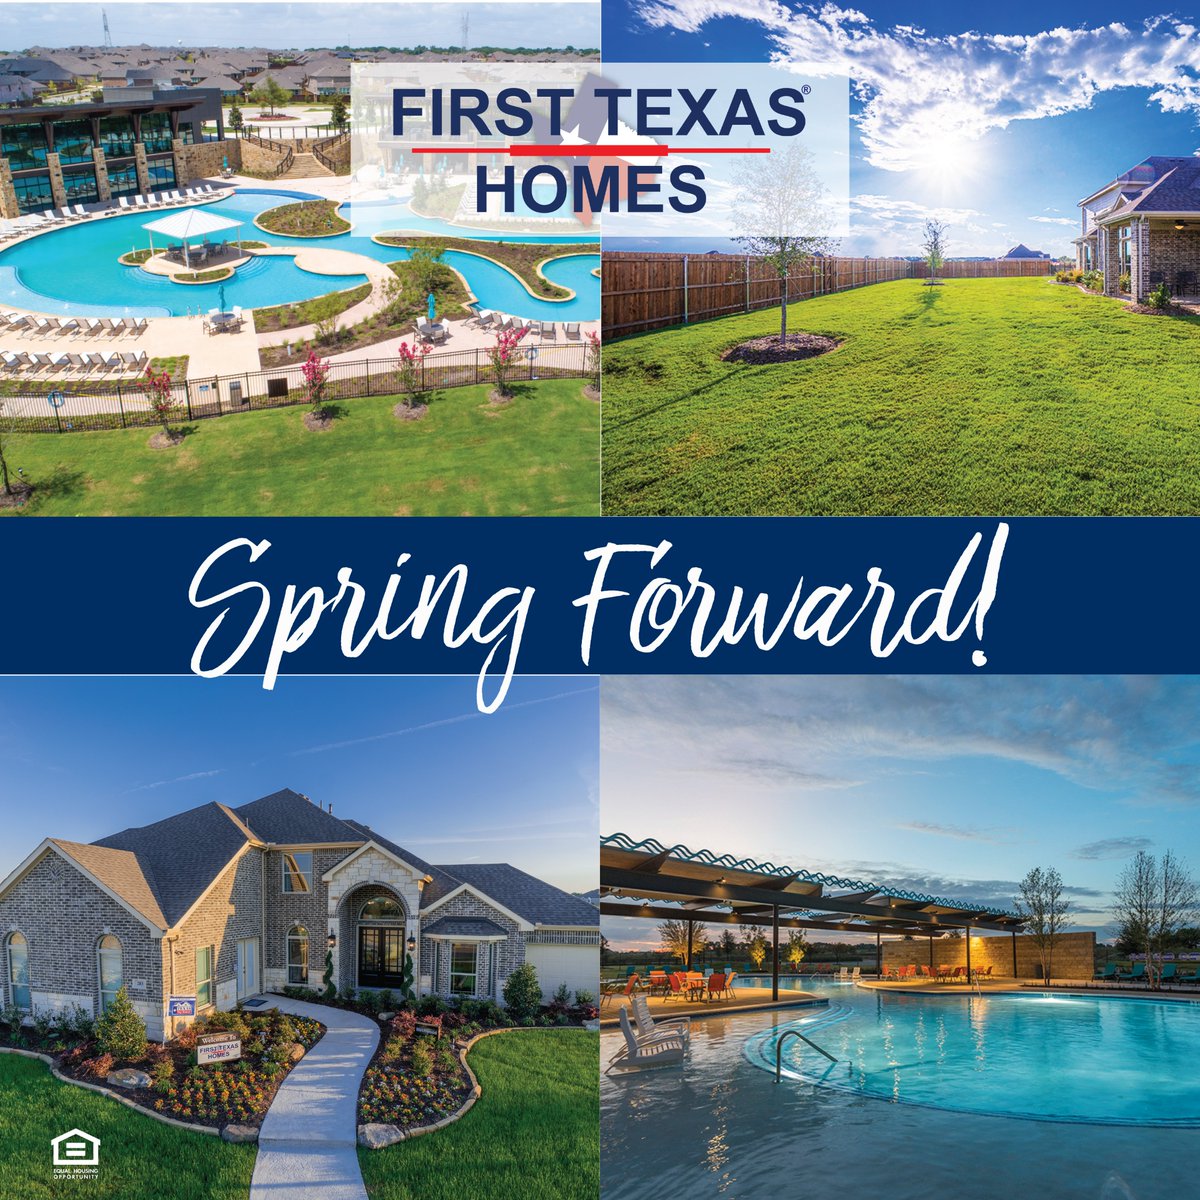 It’s Daylight Savings Time!

That wonderful time of year when our current and future residents get an extra hour of sunlight to explore our communities.

Enjoy!

#DaylightSavingsTime2023 #dallashomebuilder #dreamhome #lovewhereyoulive #newbuild #newhomesearch #texashomebuilder